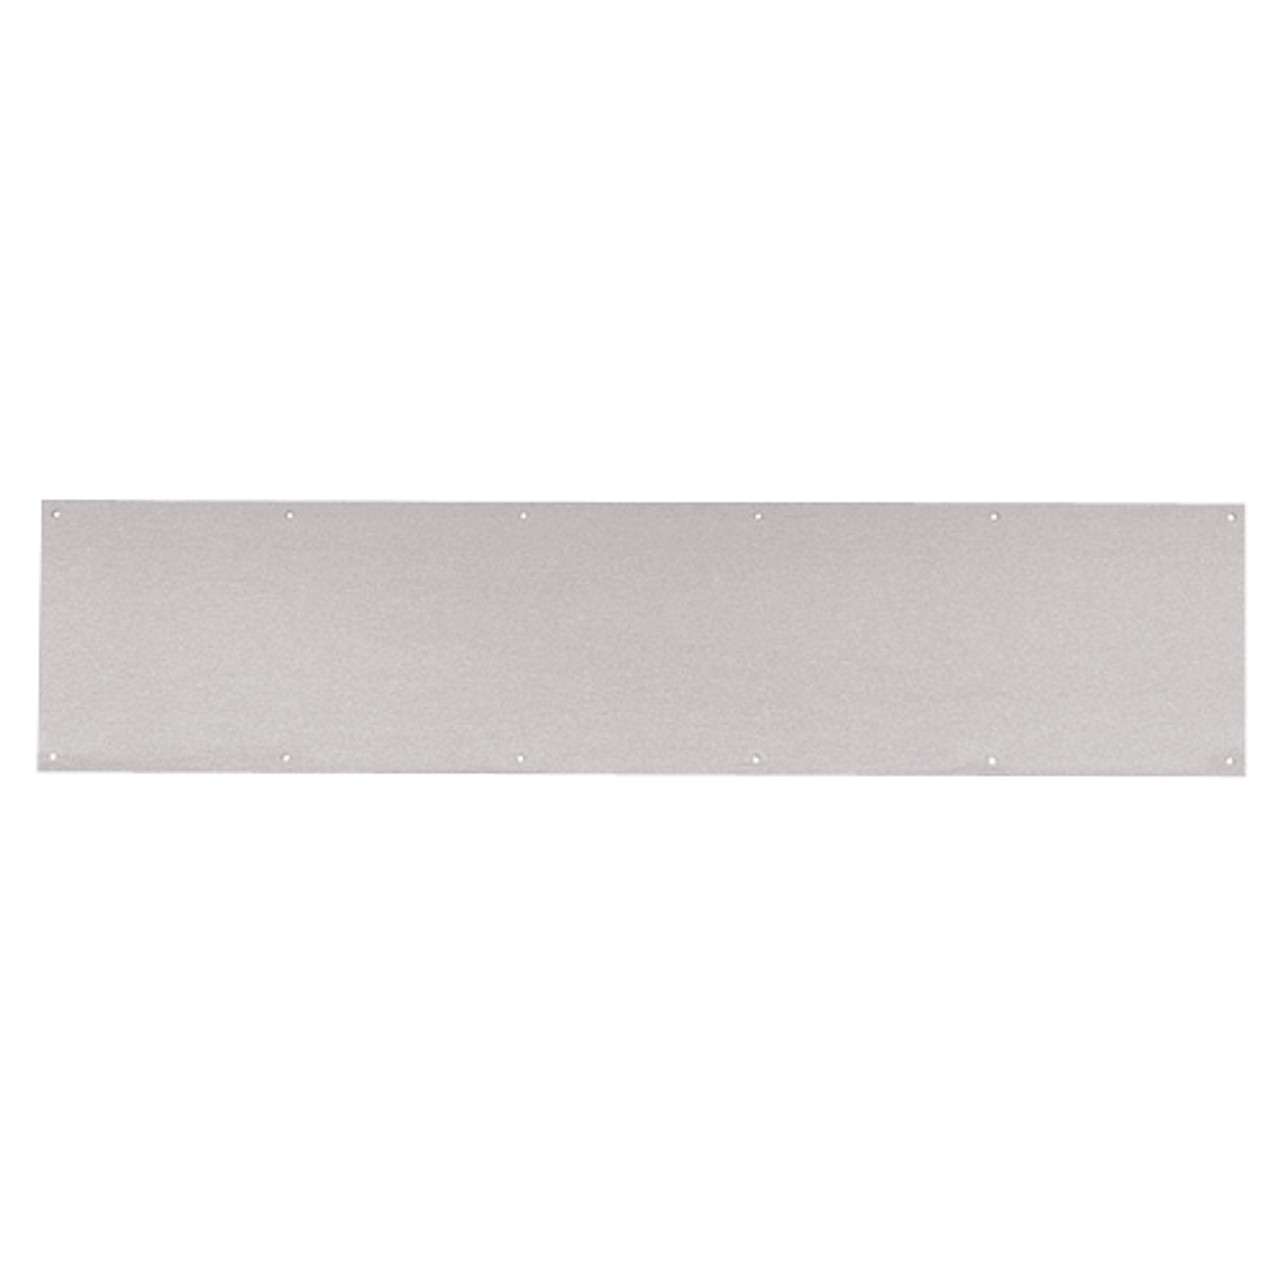 8400-US32D-36x36-B-CS Ives 8400 Series Protection Plate in Satin Stainless Steel